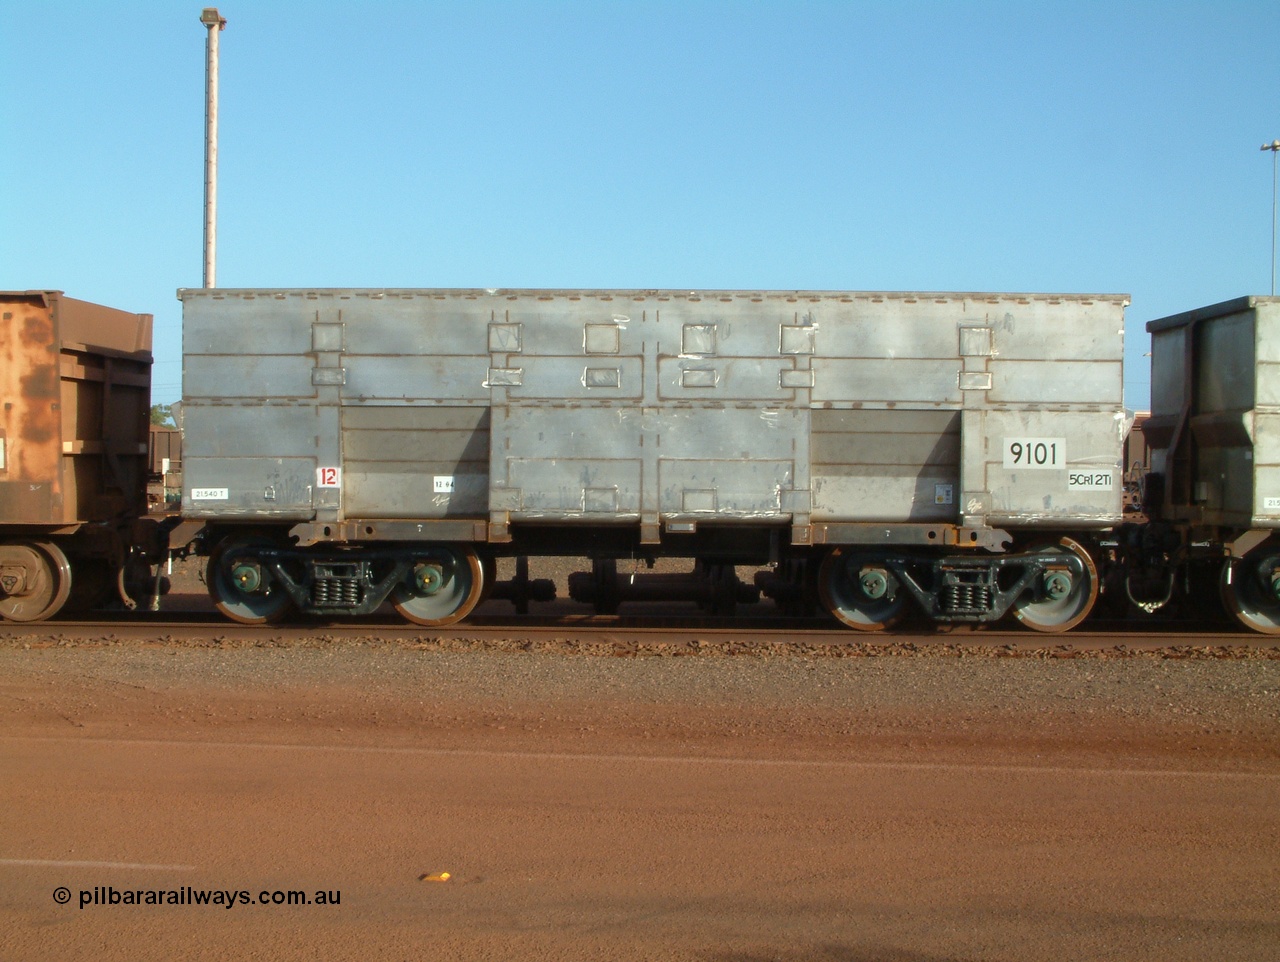 041225 064654
Nelson Point Ore Car Repair Shops, brand new Bradken NSW built ore waggon 9101 asset number 2031703. These waggons are the latest additions to the fleet with 20 on order in total. They are made from the same 5Cr12Ti steel that the Goninan Golynx waggons are made. 25th December 2004.
Keywords: 9101;Bradken-NSW;BHP-ore-waggon;